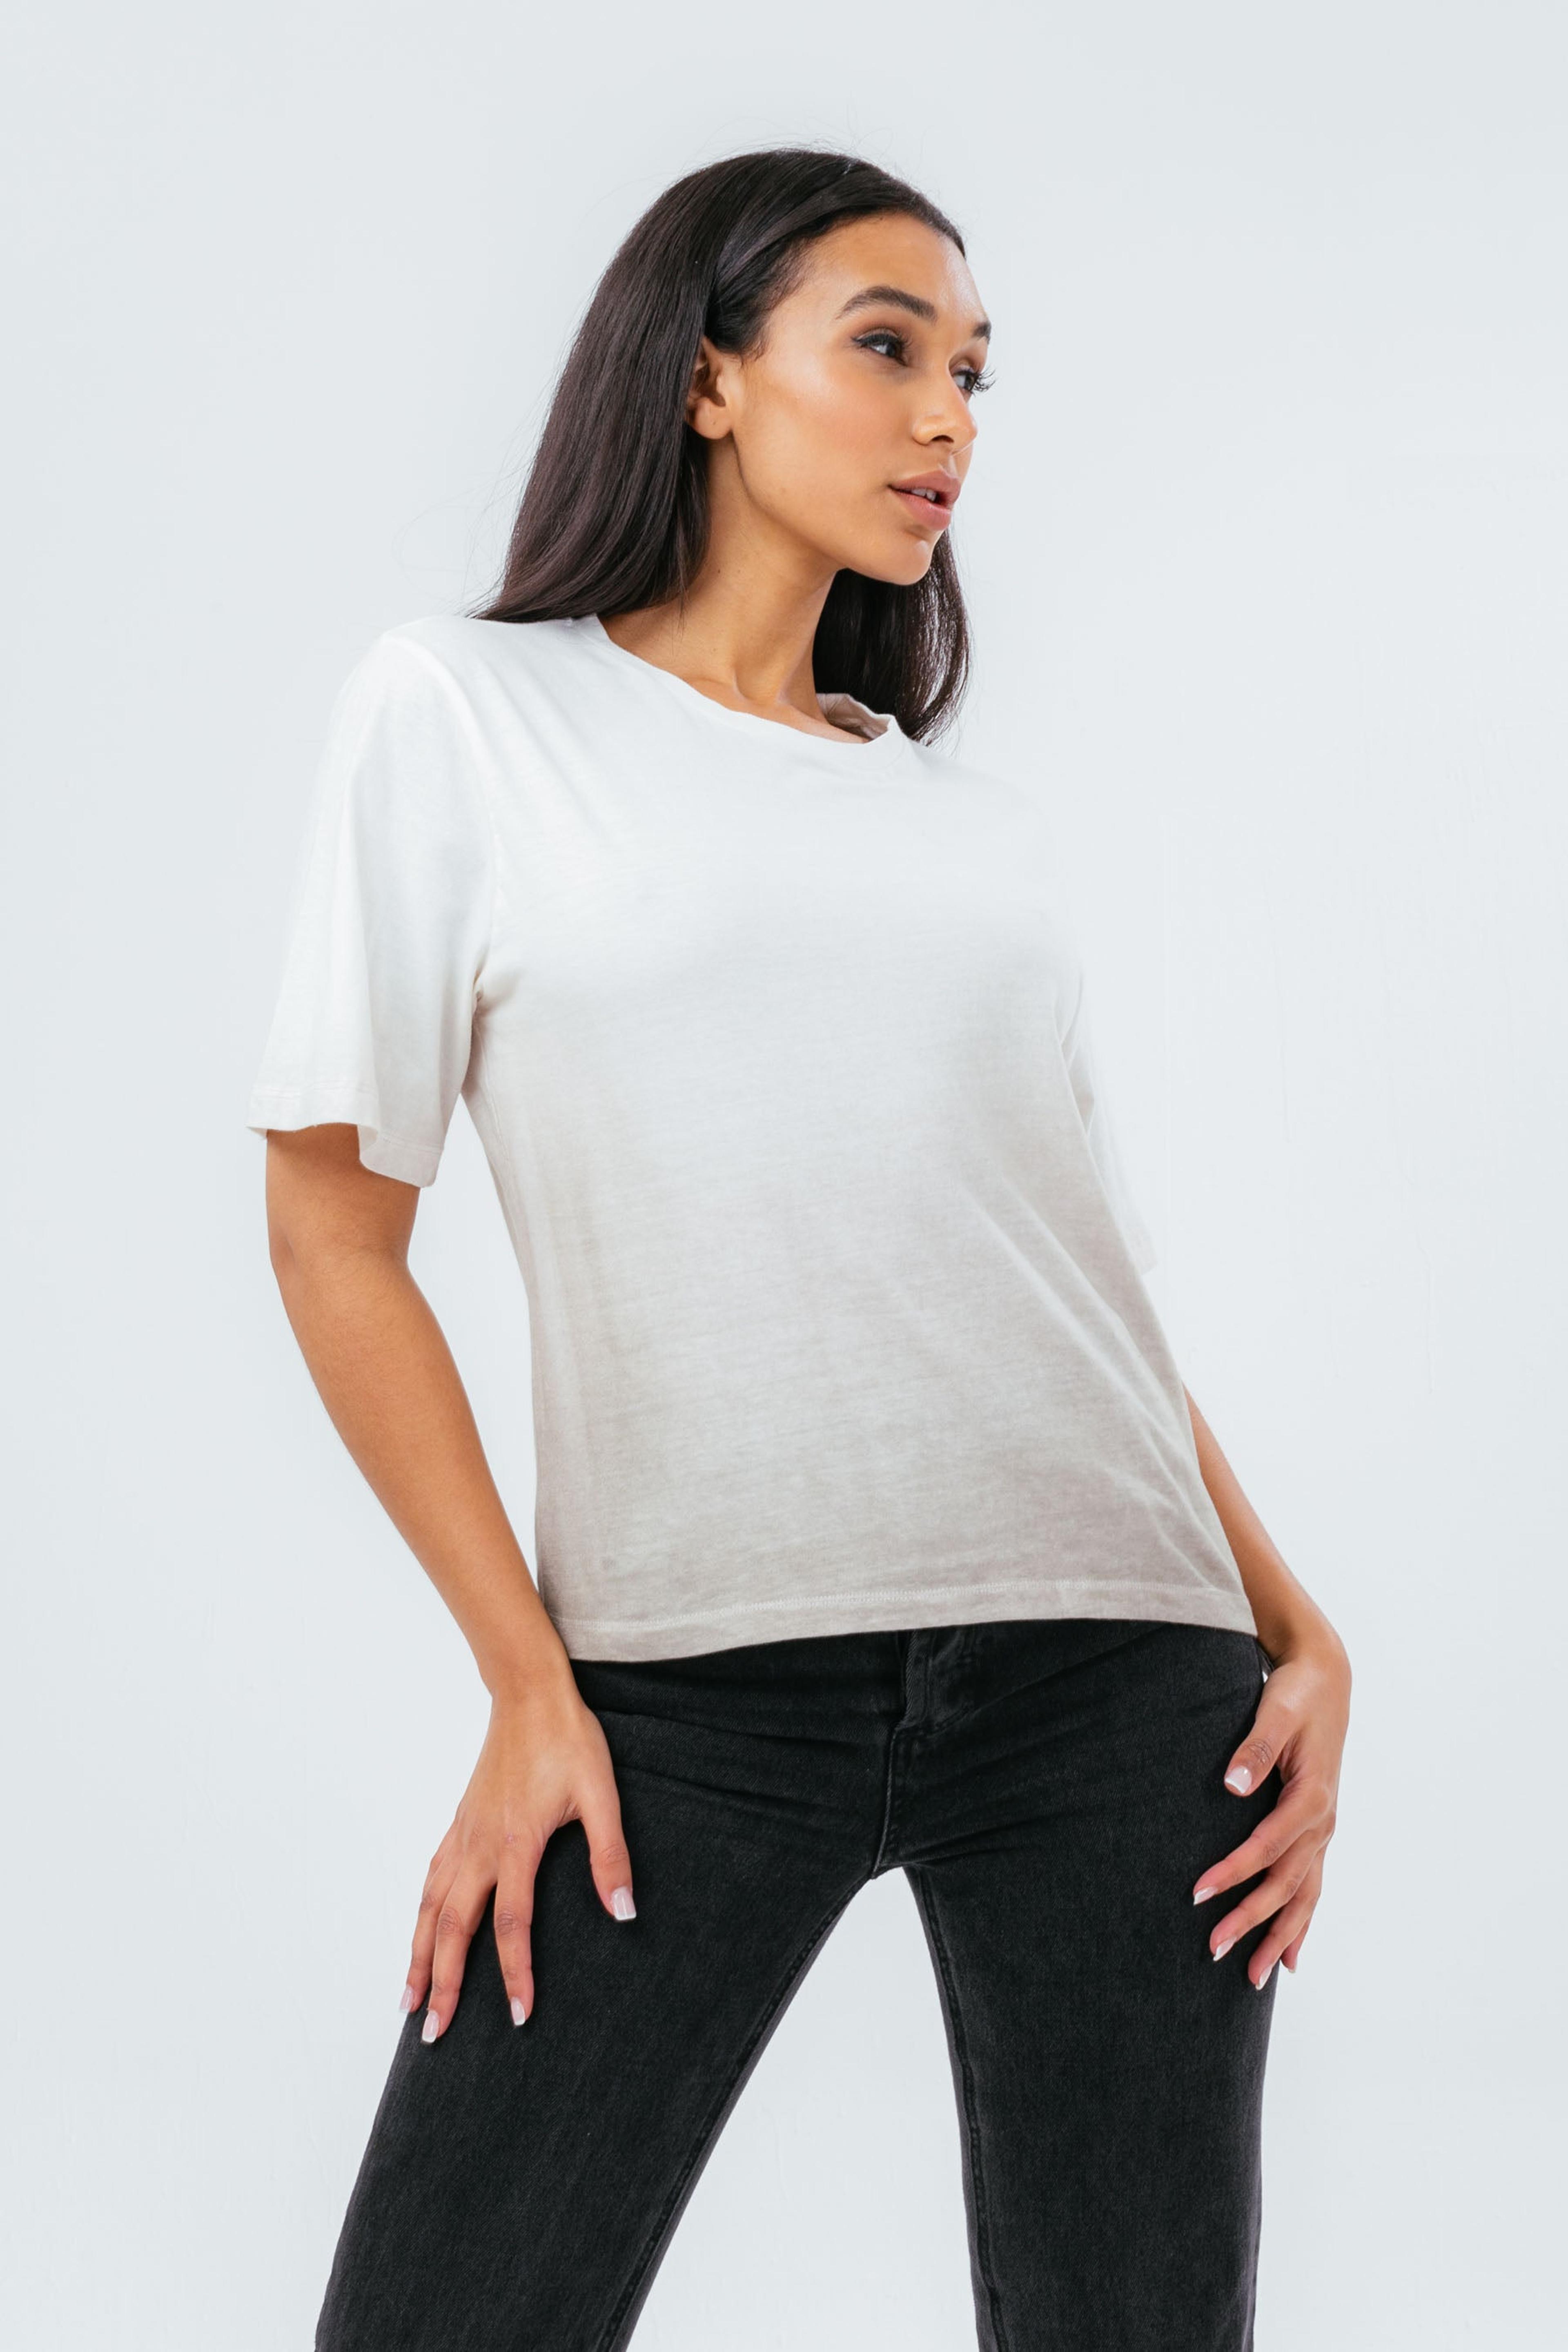 HYPE WHITE OLIVE FADE WOMEN'S T-SHIRT